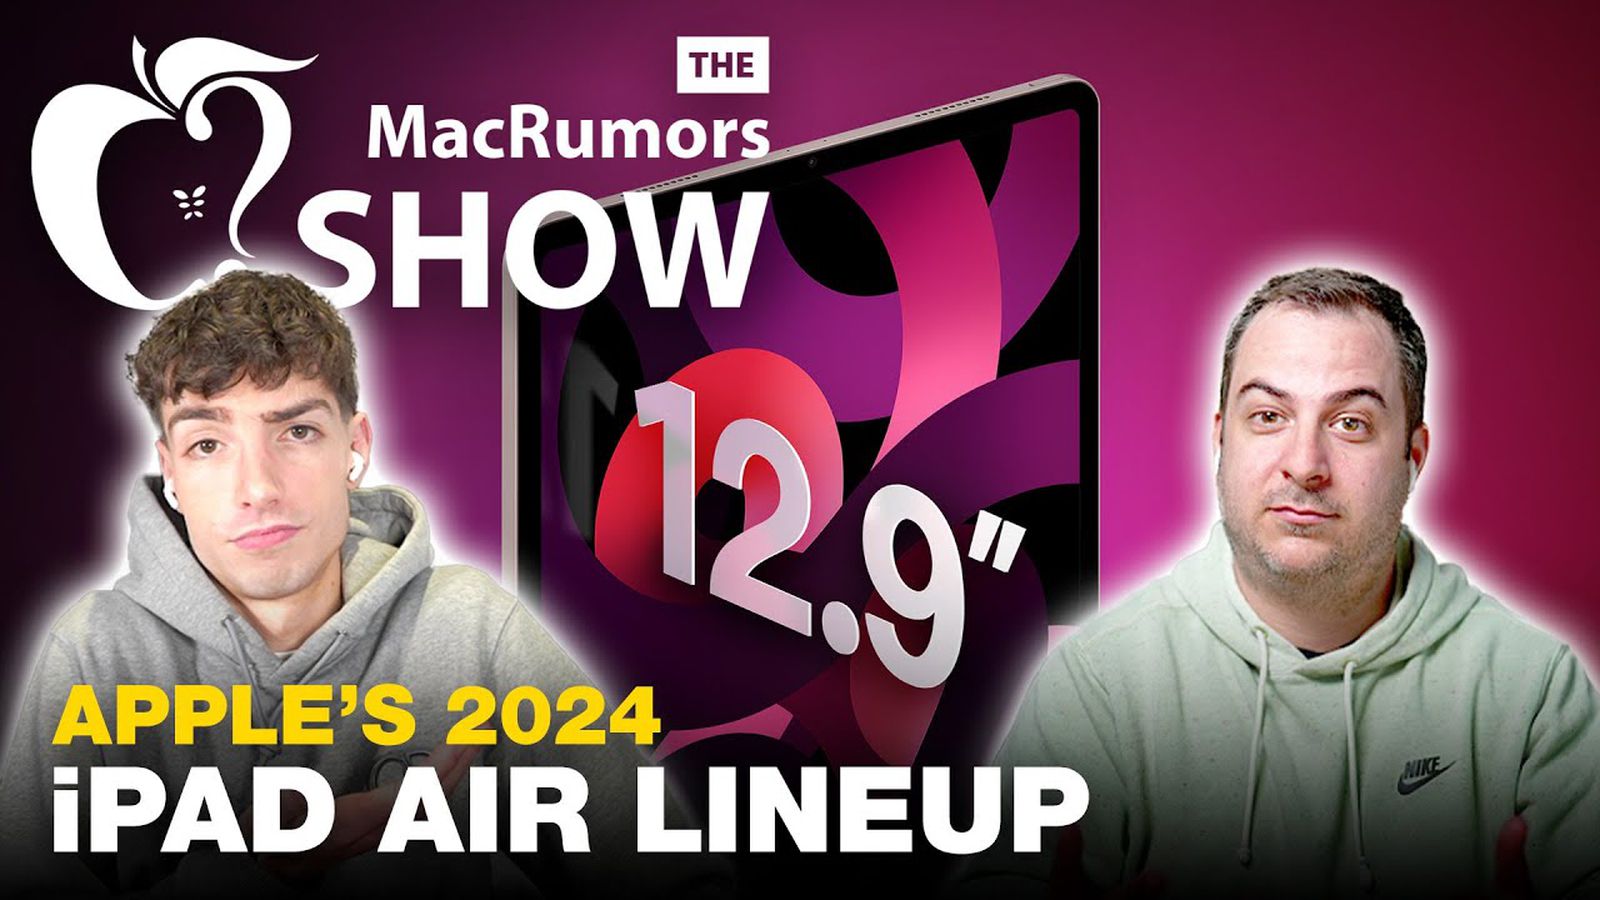 The MacRumors Show Debate: Is the New iPad Air a Game-Changer?